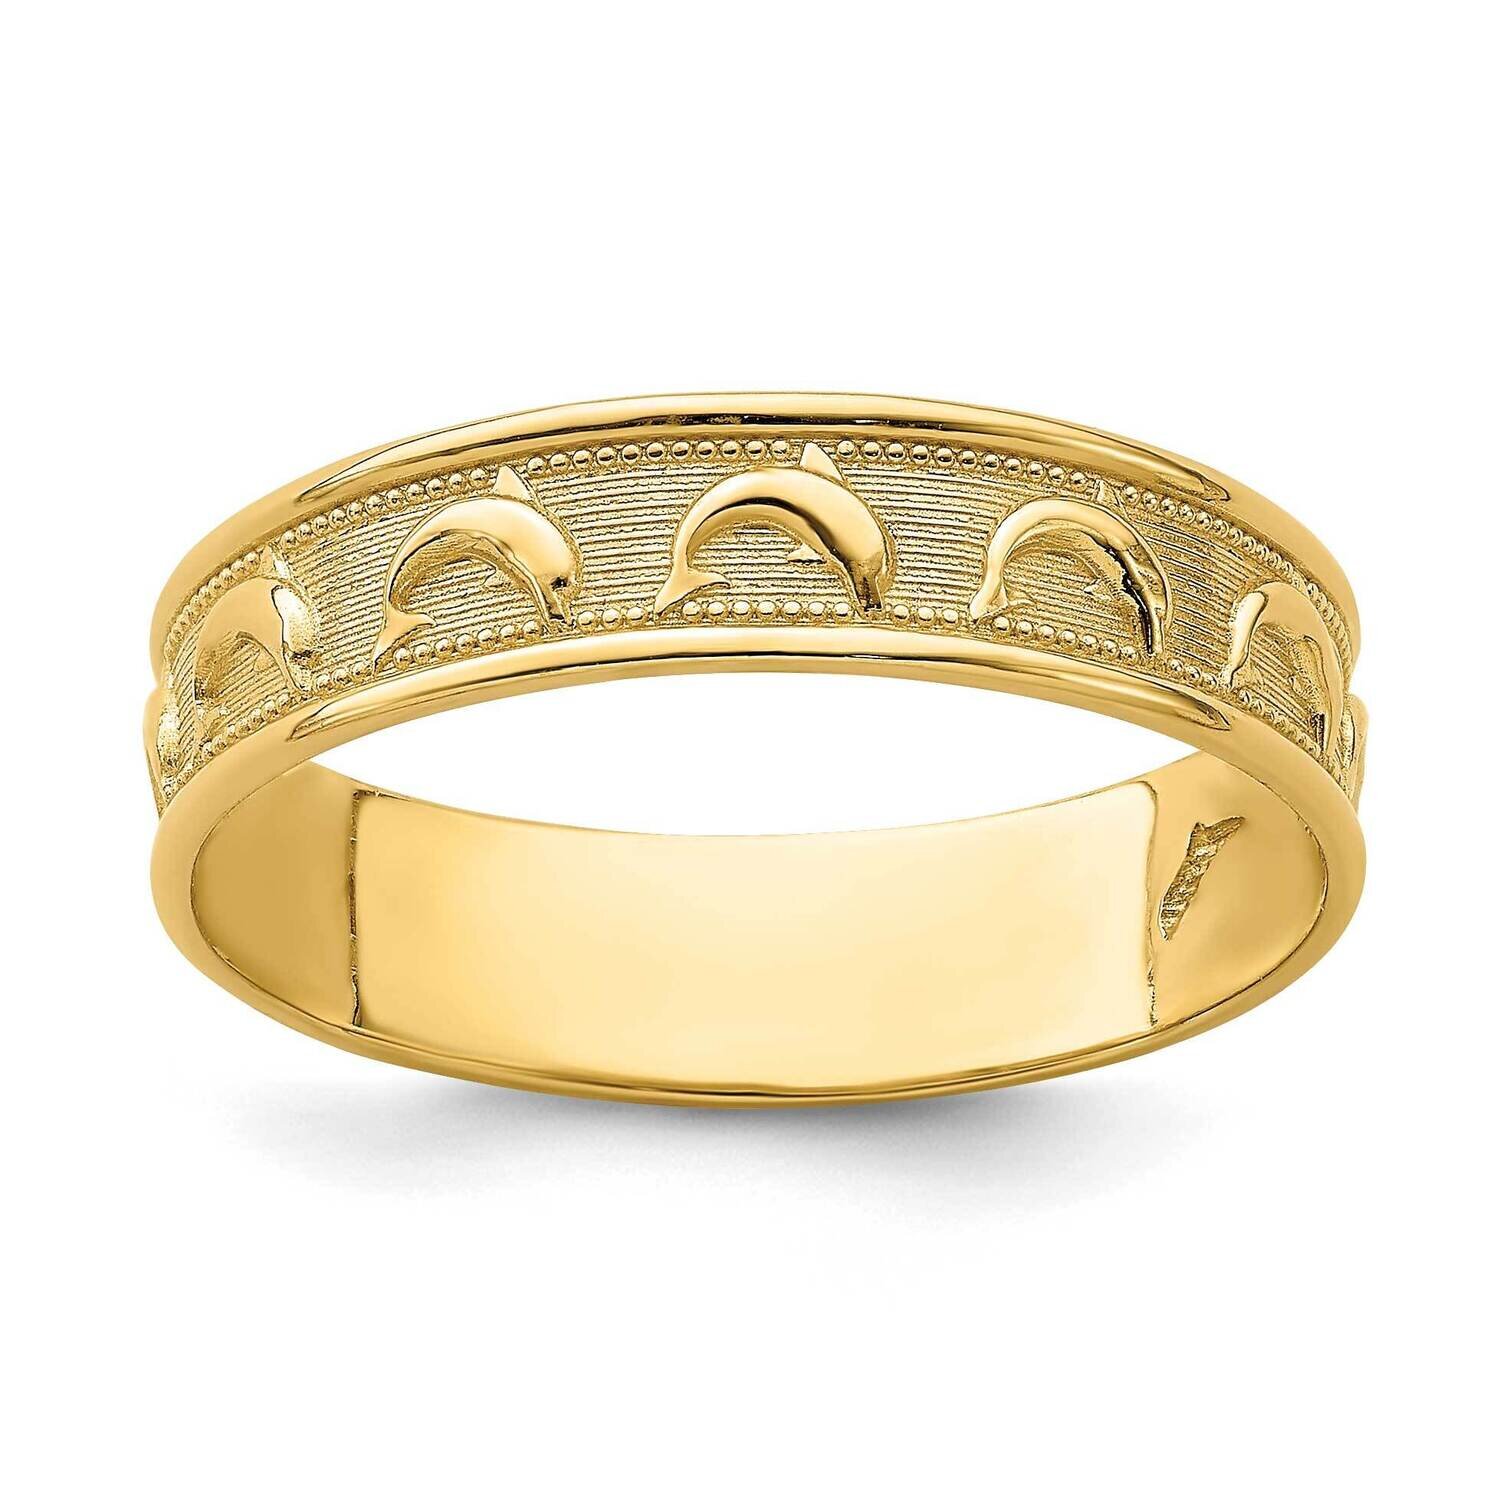 Gold Polished Textured Dolphin Engraved Thumb Ring 14k Gold K5766